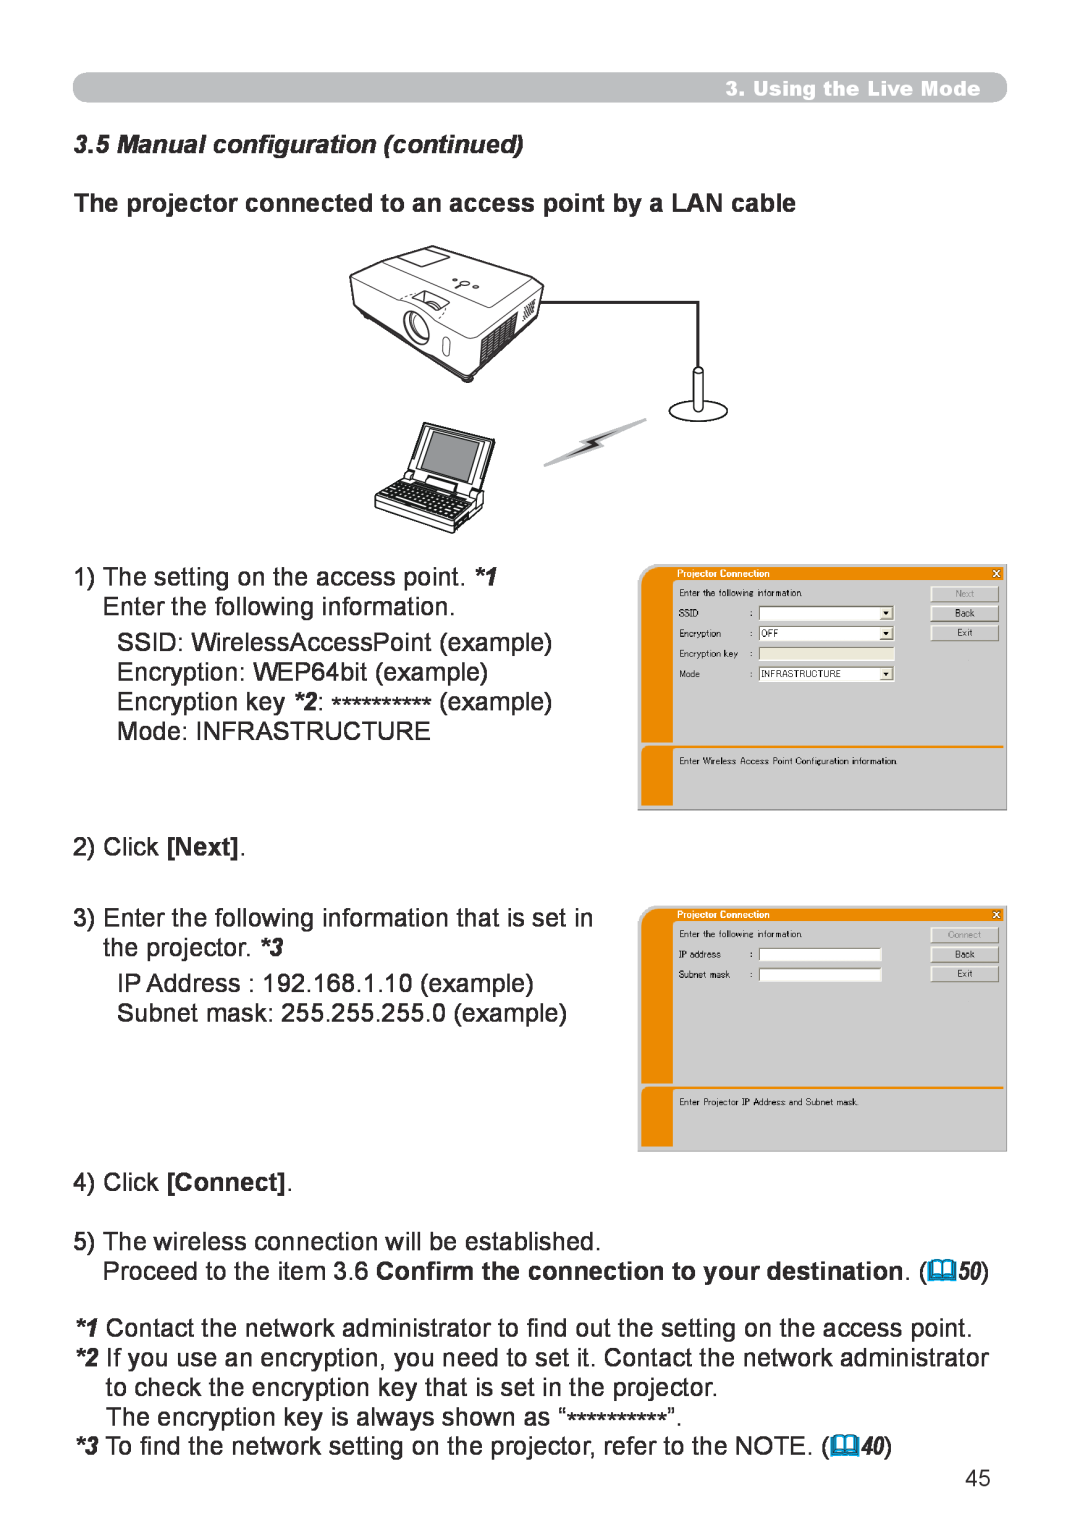 Hitachi CP-X267 user manual Manual configuration continued, SSID: WirelessAccessPoint example, 4Click Connect 